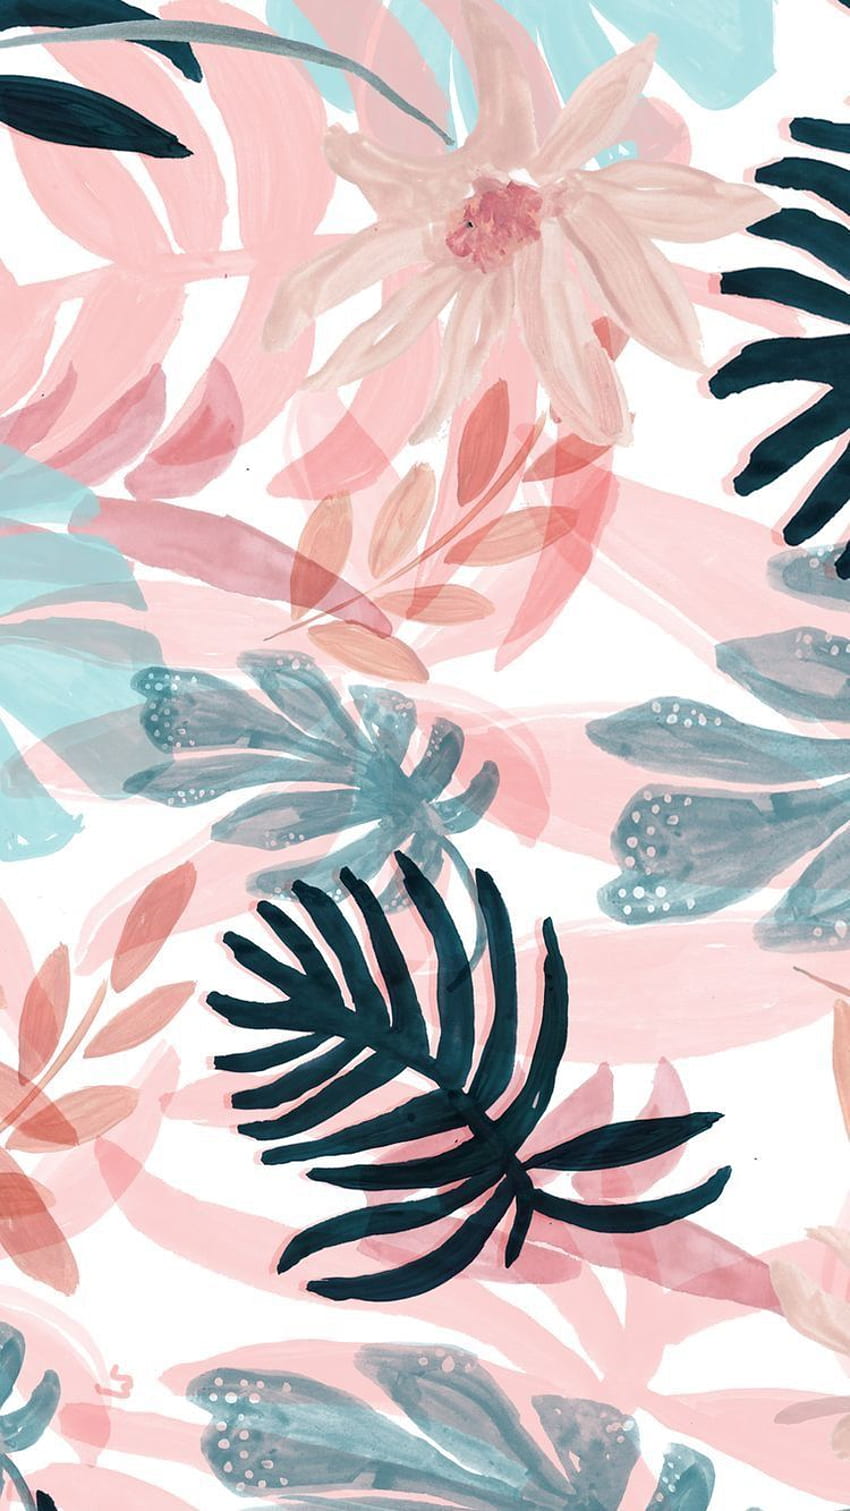 Emily Croft on Misc. iPhone pattern, Cute Tropical Flowers Tumblr HD phone wallpaper